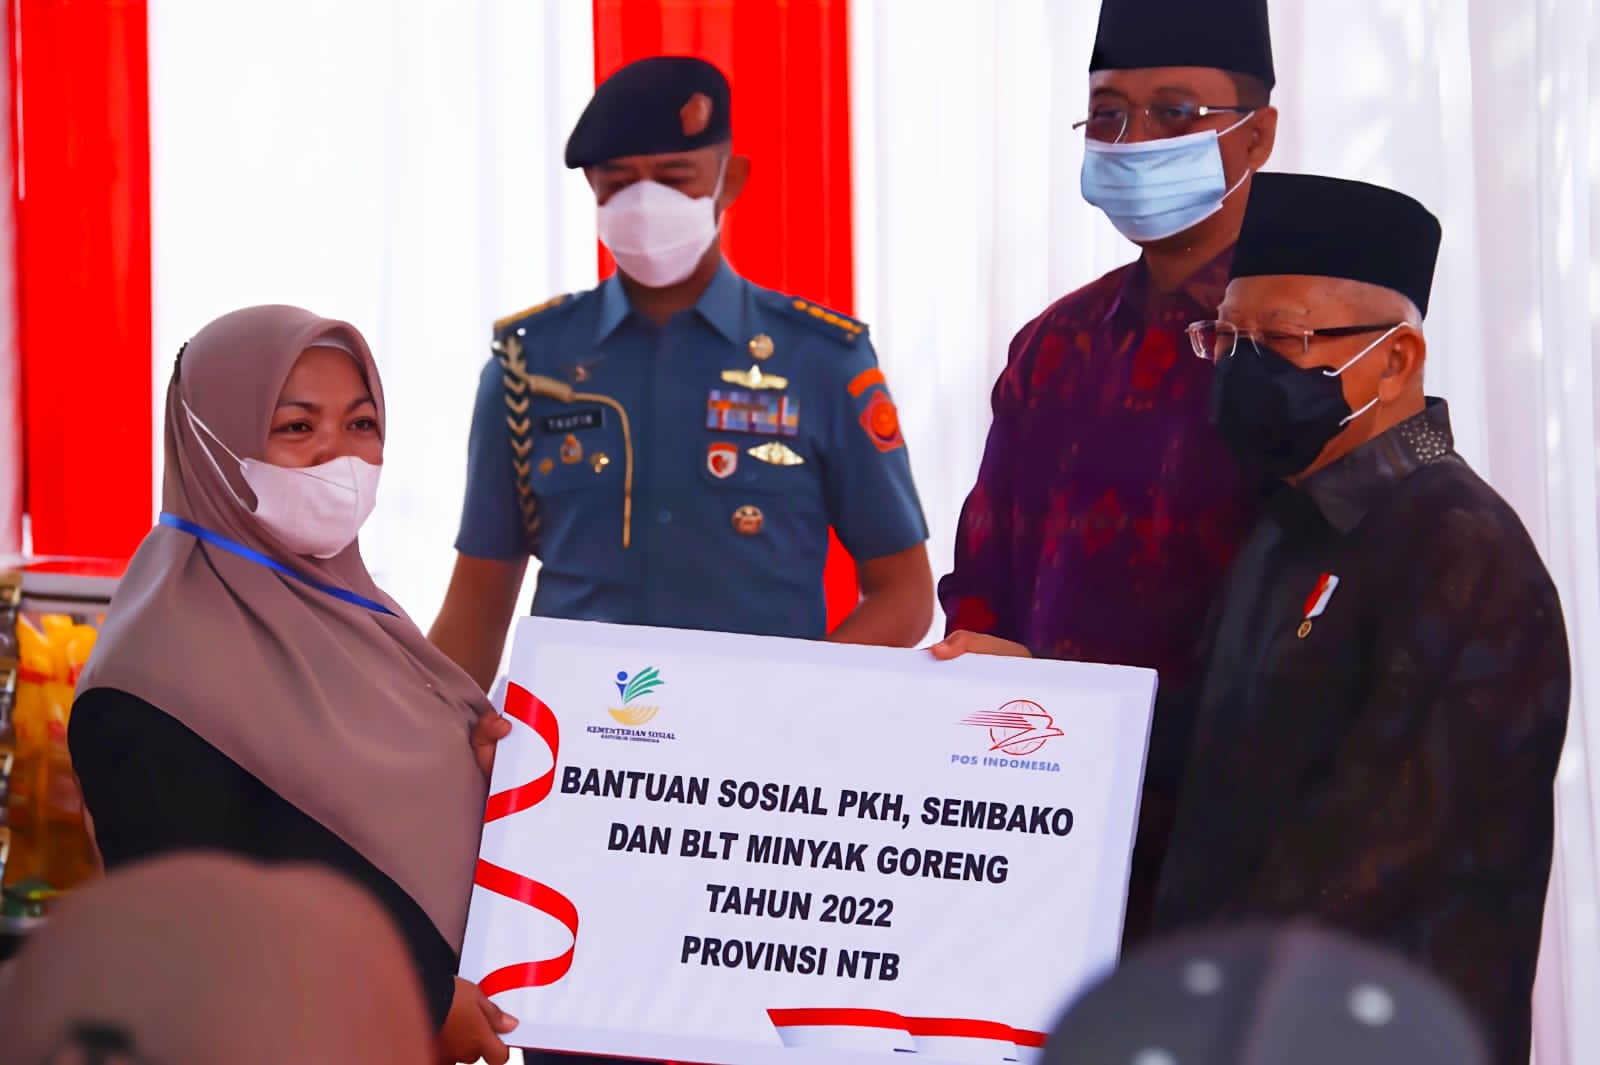 The Vice President Raises the Spirit of Victims of Violence in Mataram with Social Assistance